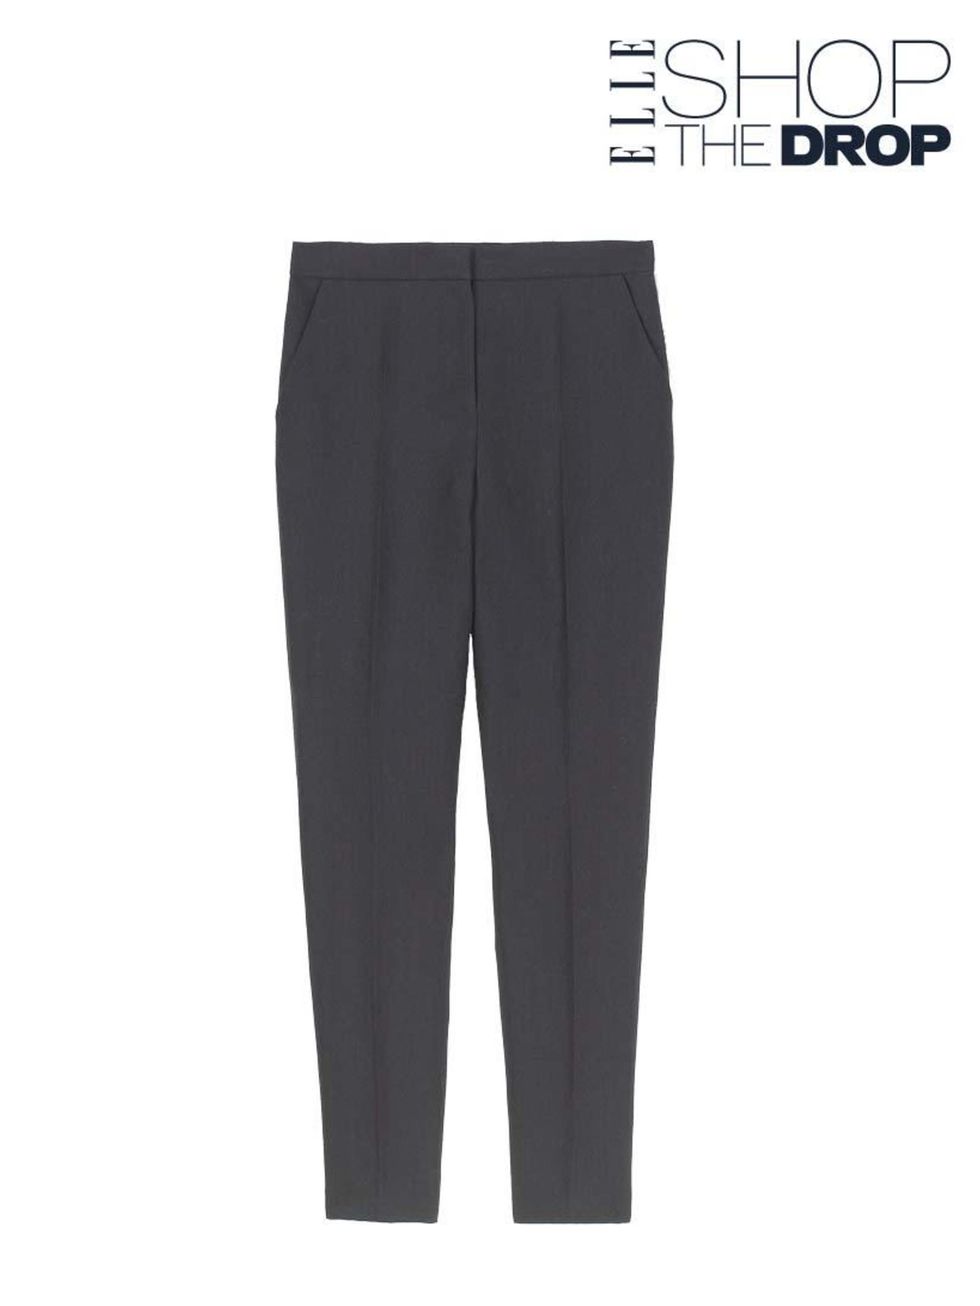 <p><a href="http://www.cosstores.com/gb/Shop/Women/Trousers/Leather_detail_trousers/46887-7846930.1#c-24479">Cos</a> trousers, £79</p>

<p>Read more about <a href="http://www.elleuk.com/fashion/news/introducing-shop-the-drop">Shop The Drop</a></p>